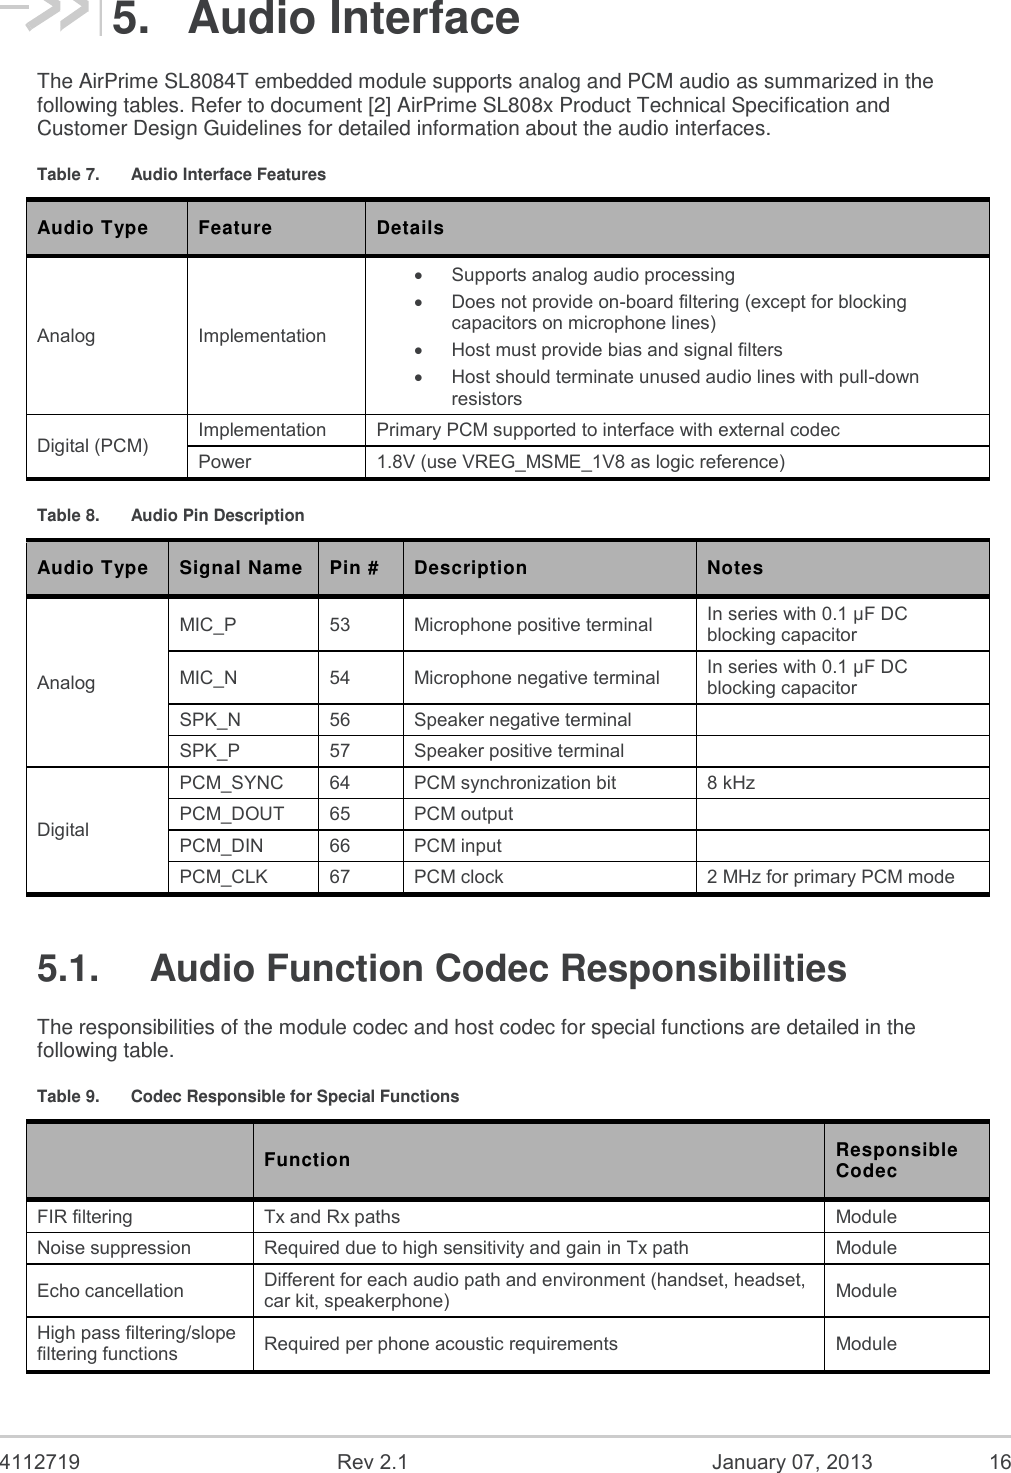  4112719  Rev 2.1  January 07, 2013  16 5.  Audio Interface The AirPrime SL8084T embedded module supports analog and PCM audio as summarized in the following tables. Refer to document [2] AirPrime SL808x Product Technical Specification and Customer Design Guidelines for detailed information about the audio interfaces. Table 7.  Audio Interface Features Audio Type Feature Details Analog Implementation   Supports analog audio processing   Does not provide on-board filtering (except for blocking capacitors on microphone lines)   Host must provide bias and signal filters   Host should terminate unused audio lines with pull-down resistors Digital (PCM) Implementation Primary PCM supported to interface with external codec Power 1.8V (use VREG_MSME_1V8 as logic reference) Table 8.  Audio Pin Description Audio Type Signal Name Pin # Description Notes Analog MIC_P 53 Microphone positive terminal In series with 0.1 μF DC blocking capacitor MIC_N 54 Microphone negative terminal In series with 0.1 μF DC blocking capacitor SPK_N 56 Speaker negative terminal  SPK_P 57 Speaker positive terminal  Digital PCM_SYNC 64 PCM synchronization bit 8 kHz PCM_DOUT 65 PCM output  PCM_DIN 66 PCM input  PCM_CLK 67 PCM clock 2 MHz for primary PCM mode 5.1.  Audio Function Codec Responsibilities The responsibilities of the module codec and host codec for special functions are detailed in the following table. Table 9.  Codec Responsible for Special Functions  Function Responsible Codec FIR filtering Tx and Rx paths Module Noise suppression Required due to high sensitivity and gain in Tx path Module Echo cancellation Different for each audio path and environment (handset, headset, car kit, speakerphone) Module High pass filtering/slope filtering functions Required per phone acoustic requirements Module 